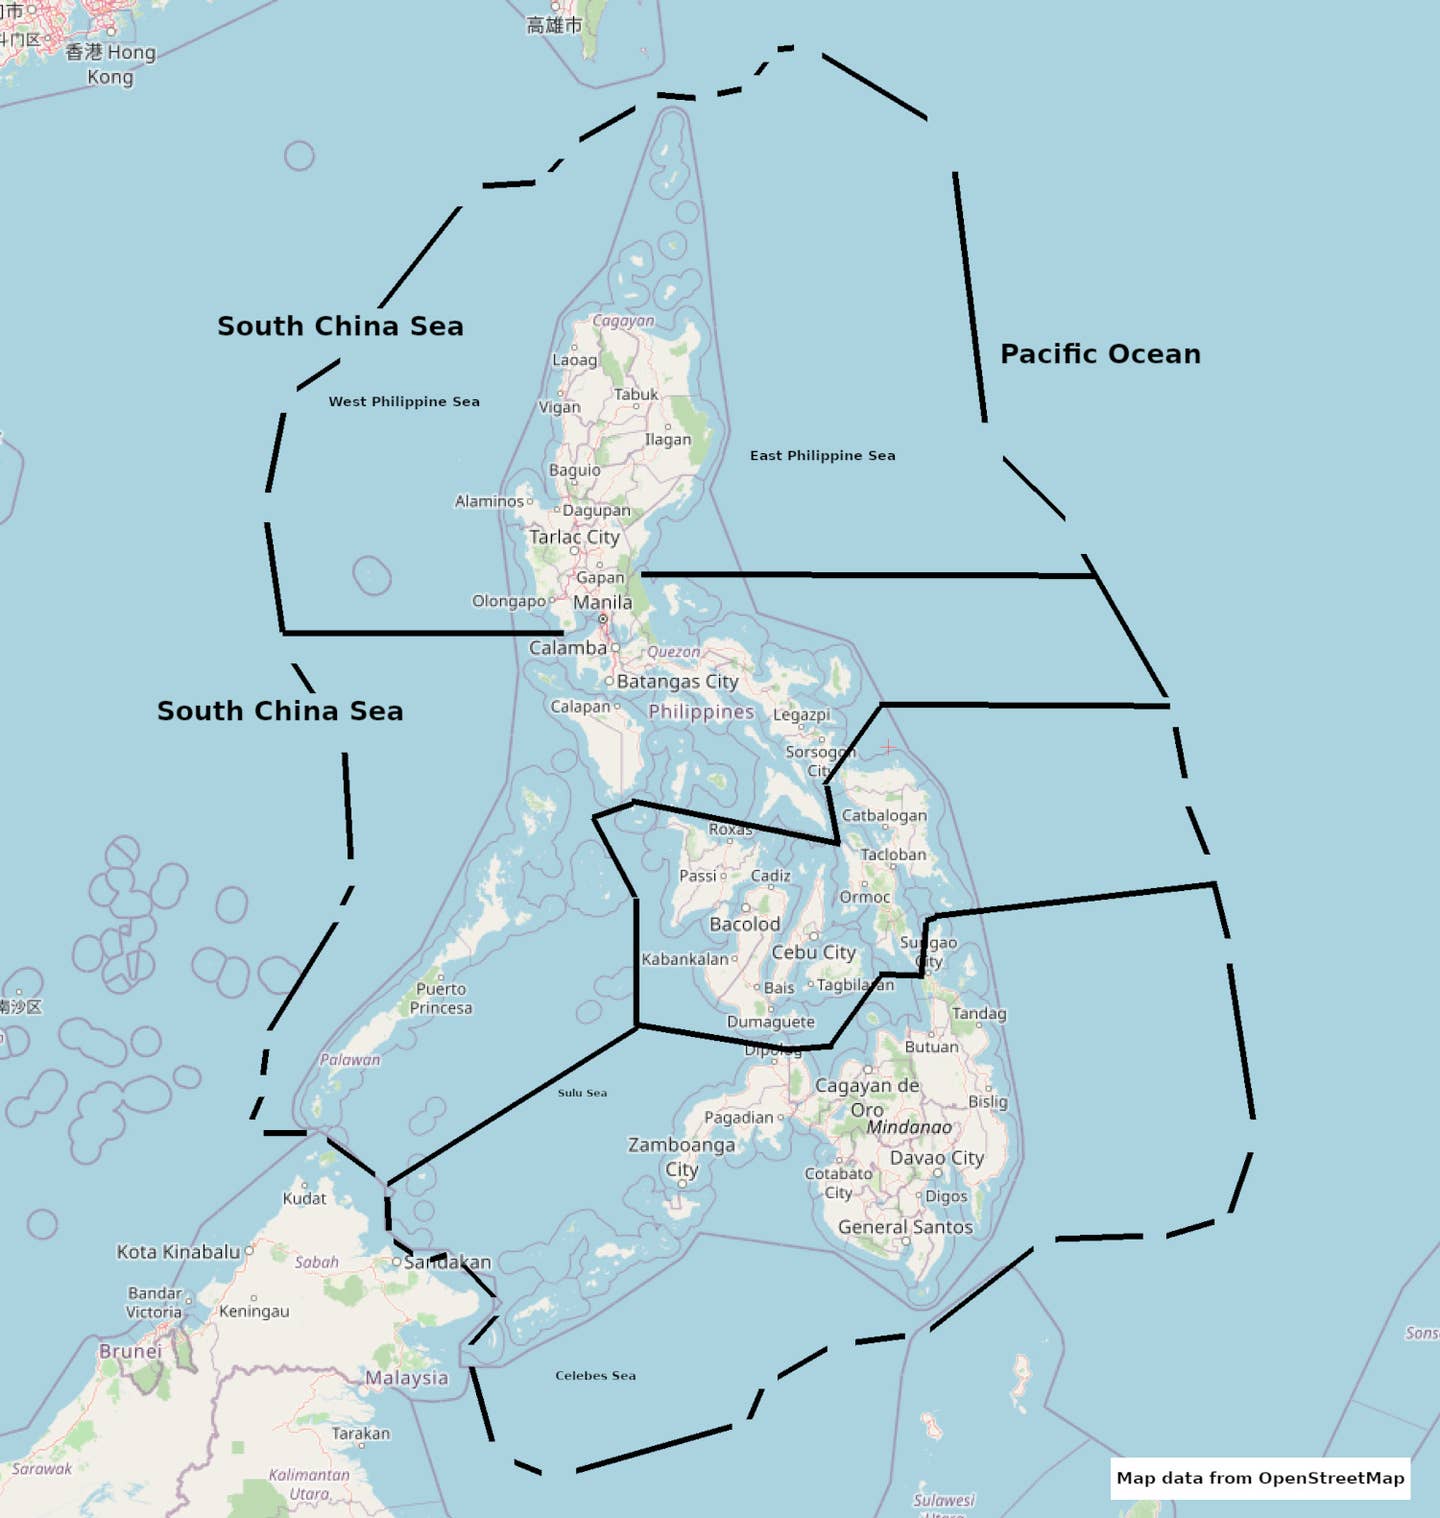 A map showing the boundaries of the West Philippine Sea, as well as other seas around the Philippines. <em>FAO-SEAFDEC via Wikimedia</em>